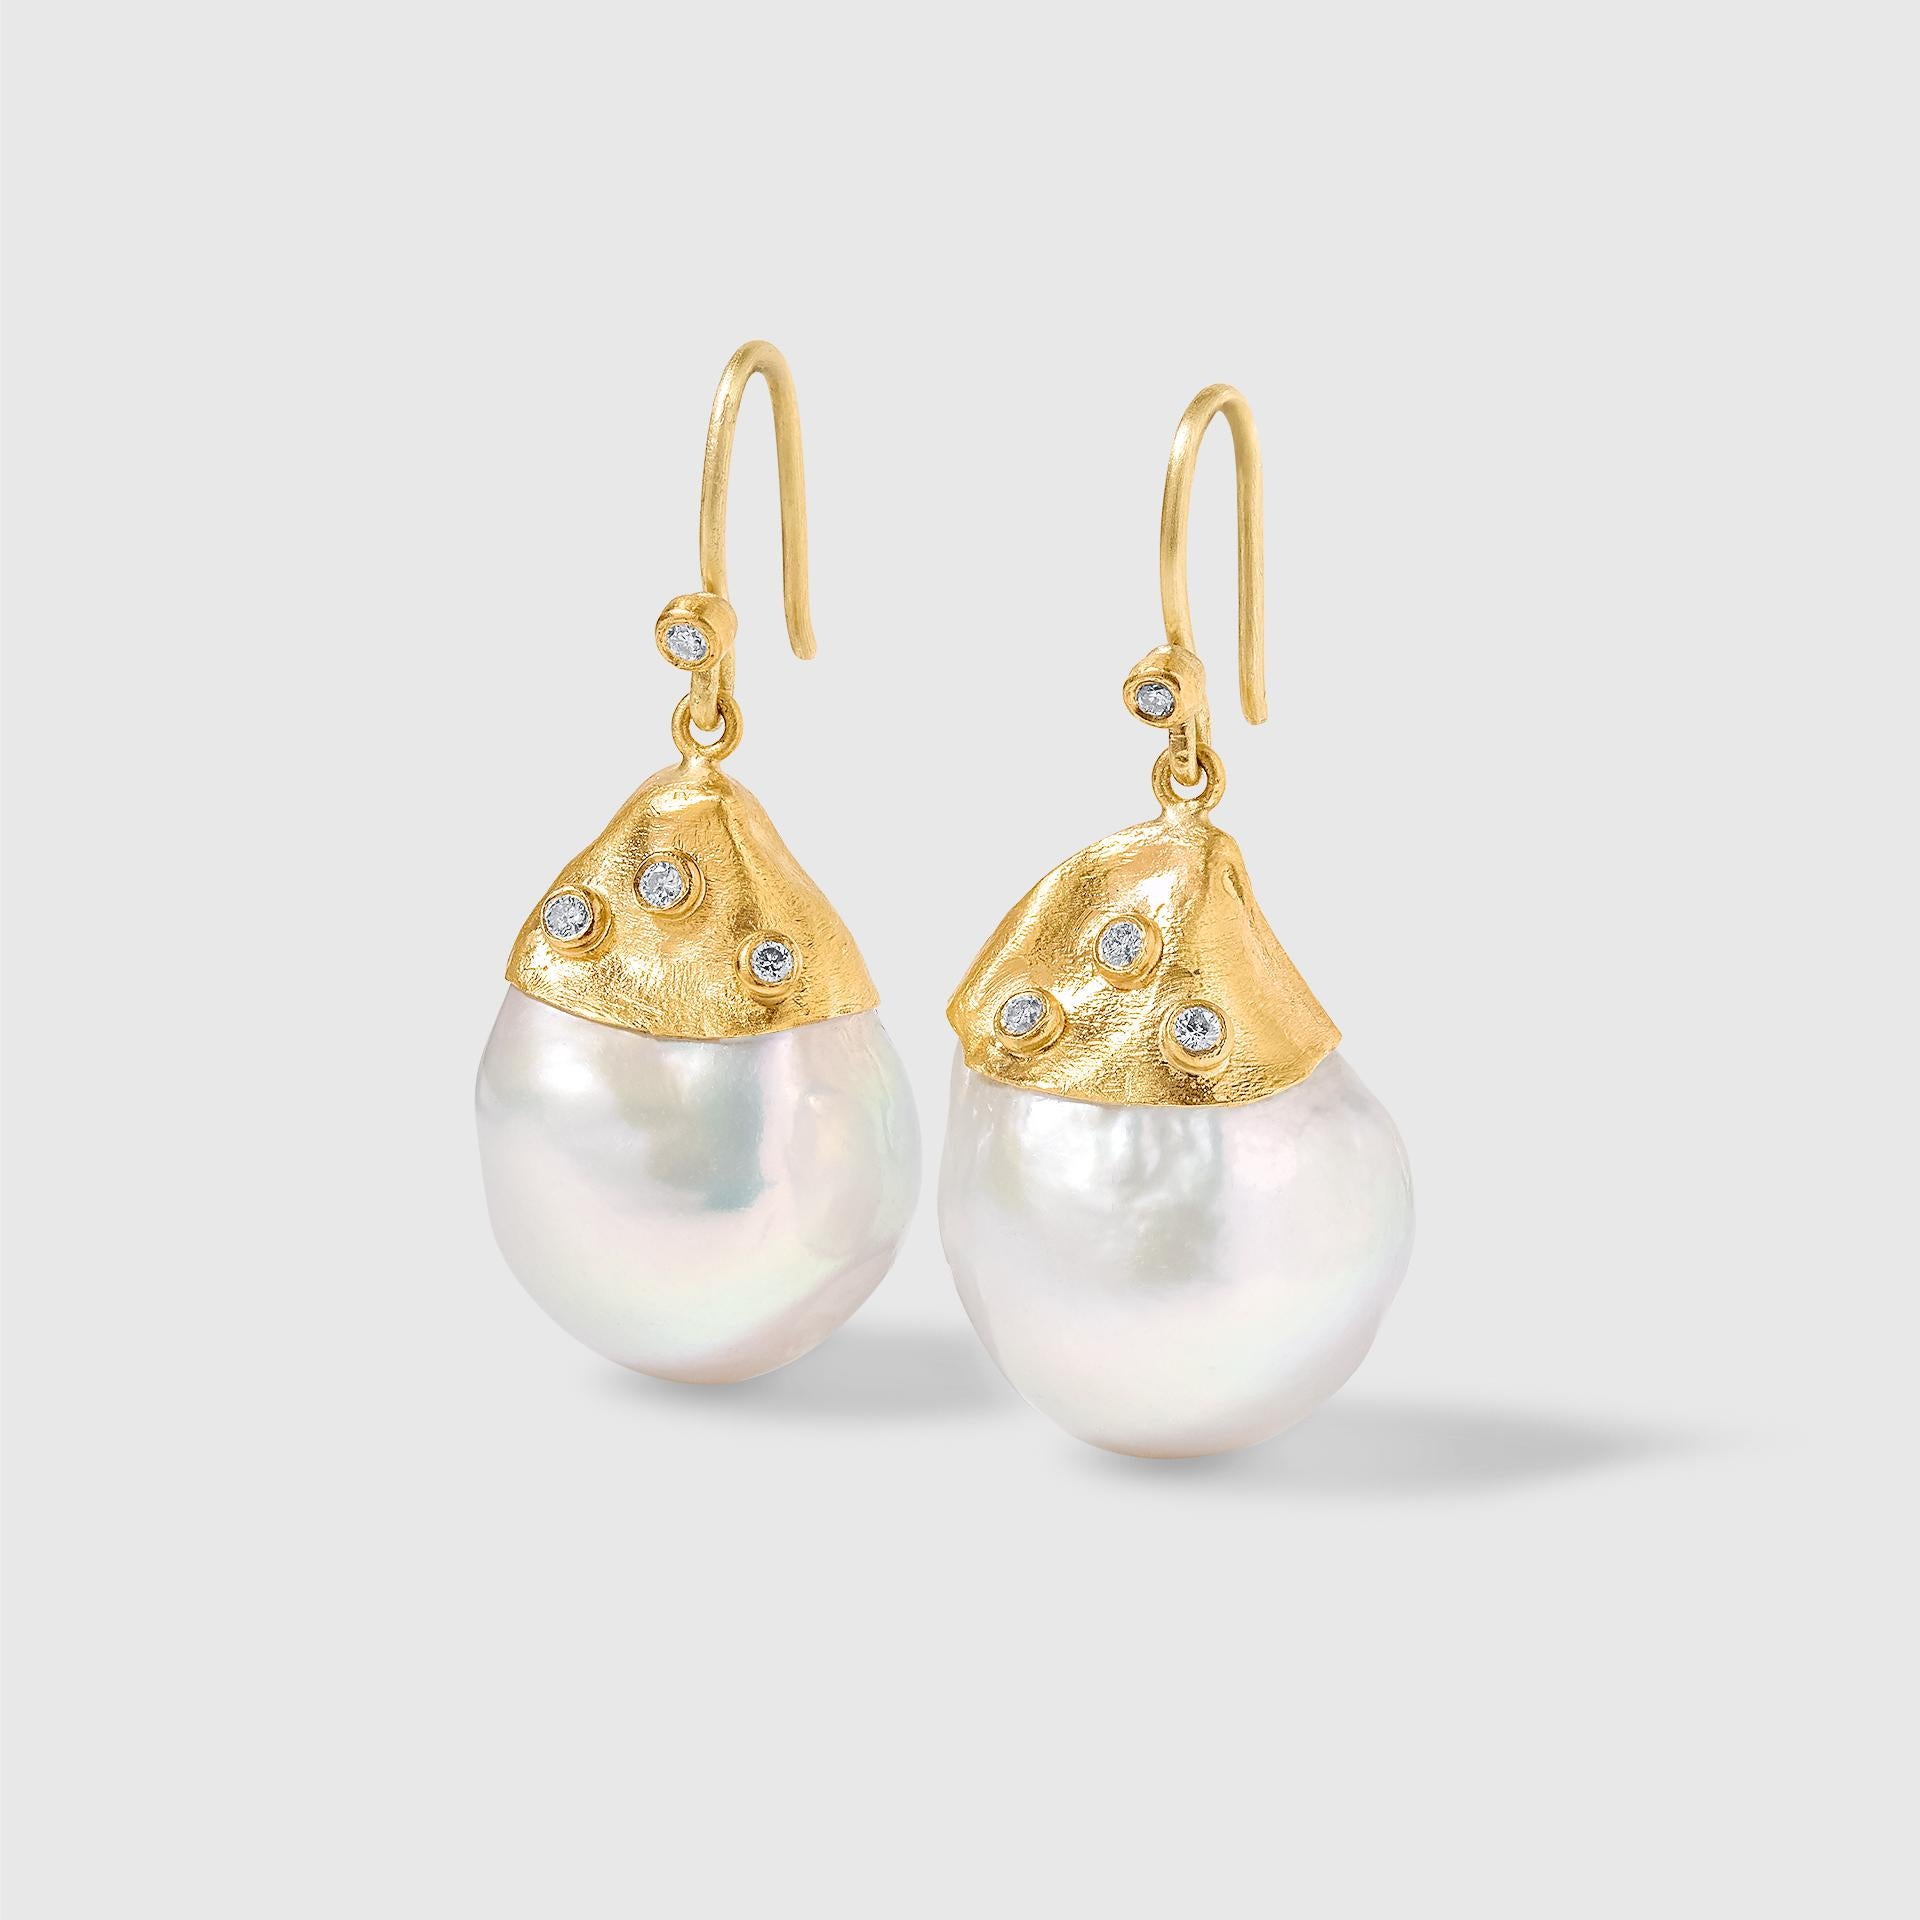 Large, White, 54ct Baroque Pearl Earrings with Diamonds, in 24kt Gold by Prehistoric Works of Istanbul, Turkey. Length: 34mm (1.4